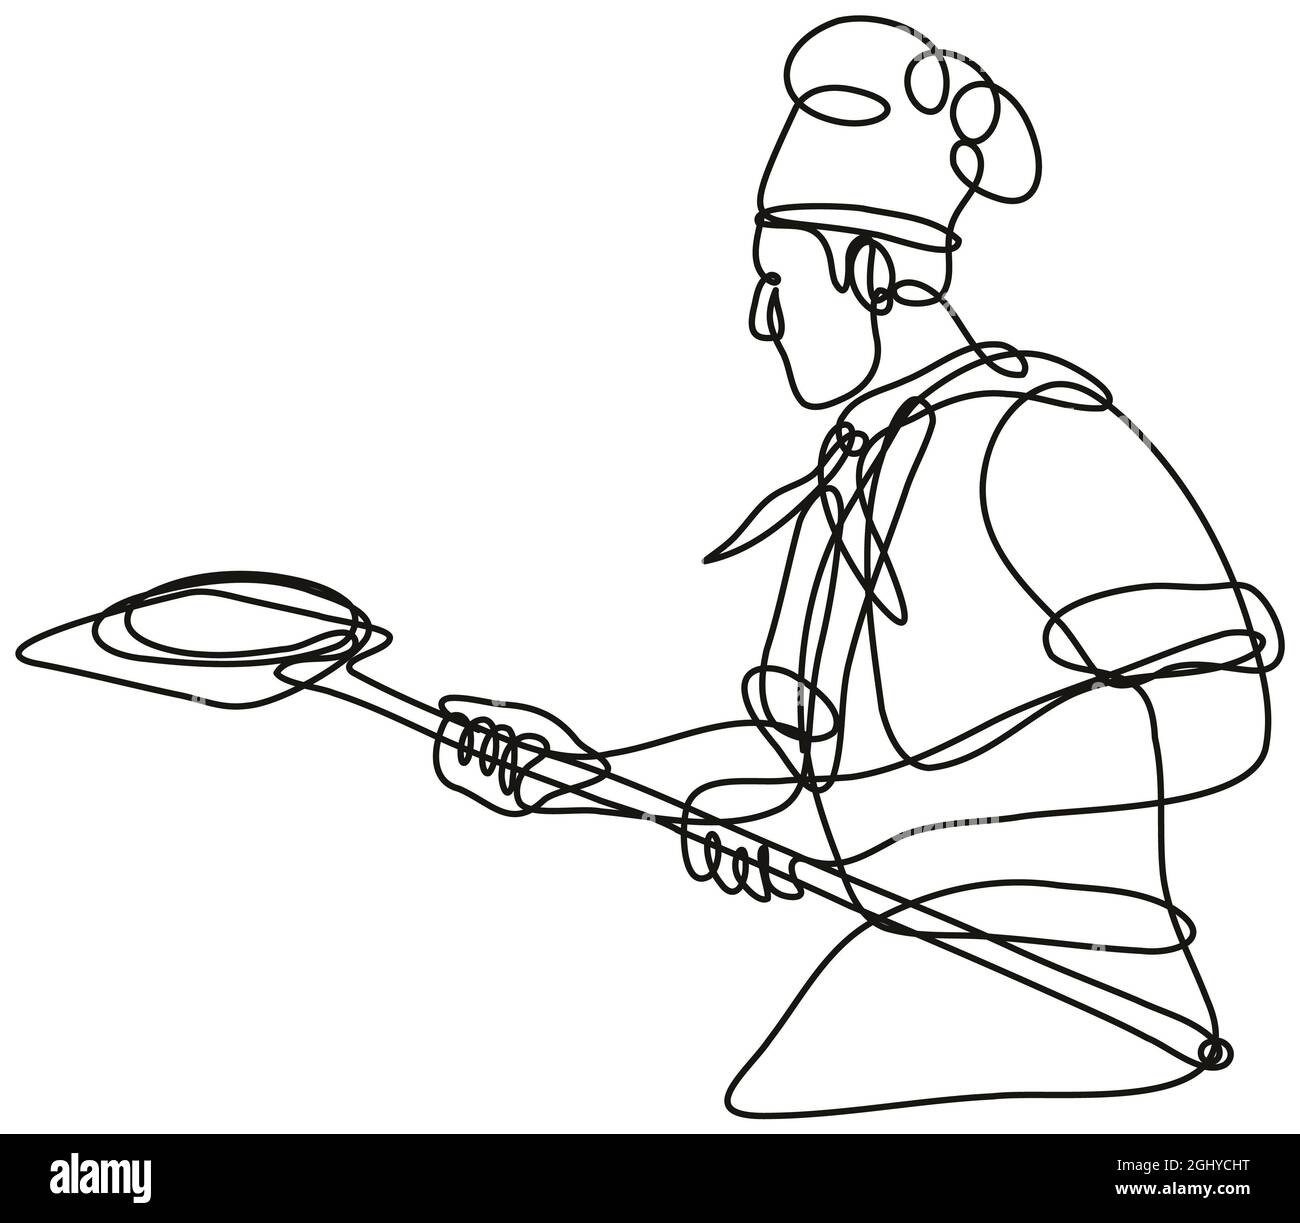 Pizza Baker Chef ou Cook Holding Peel Continuous Line Drawing Banque D'Images